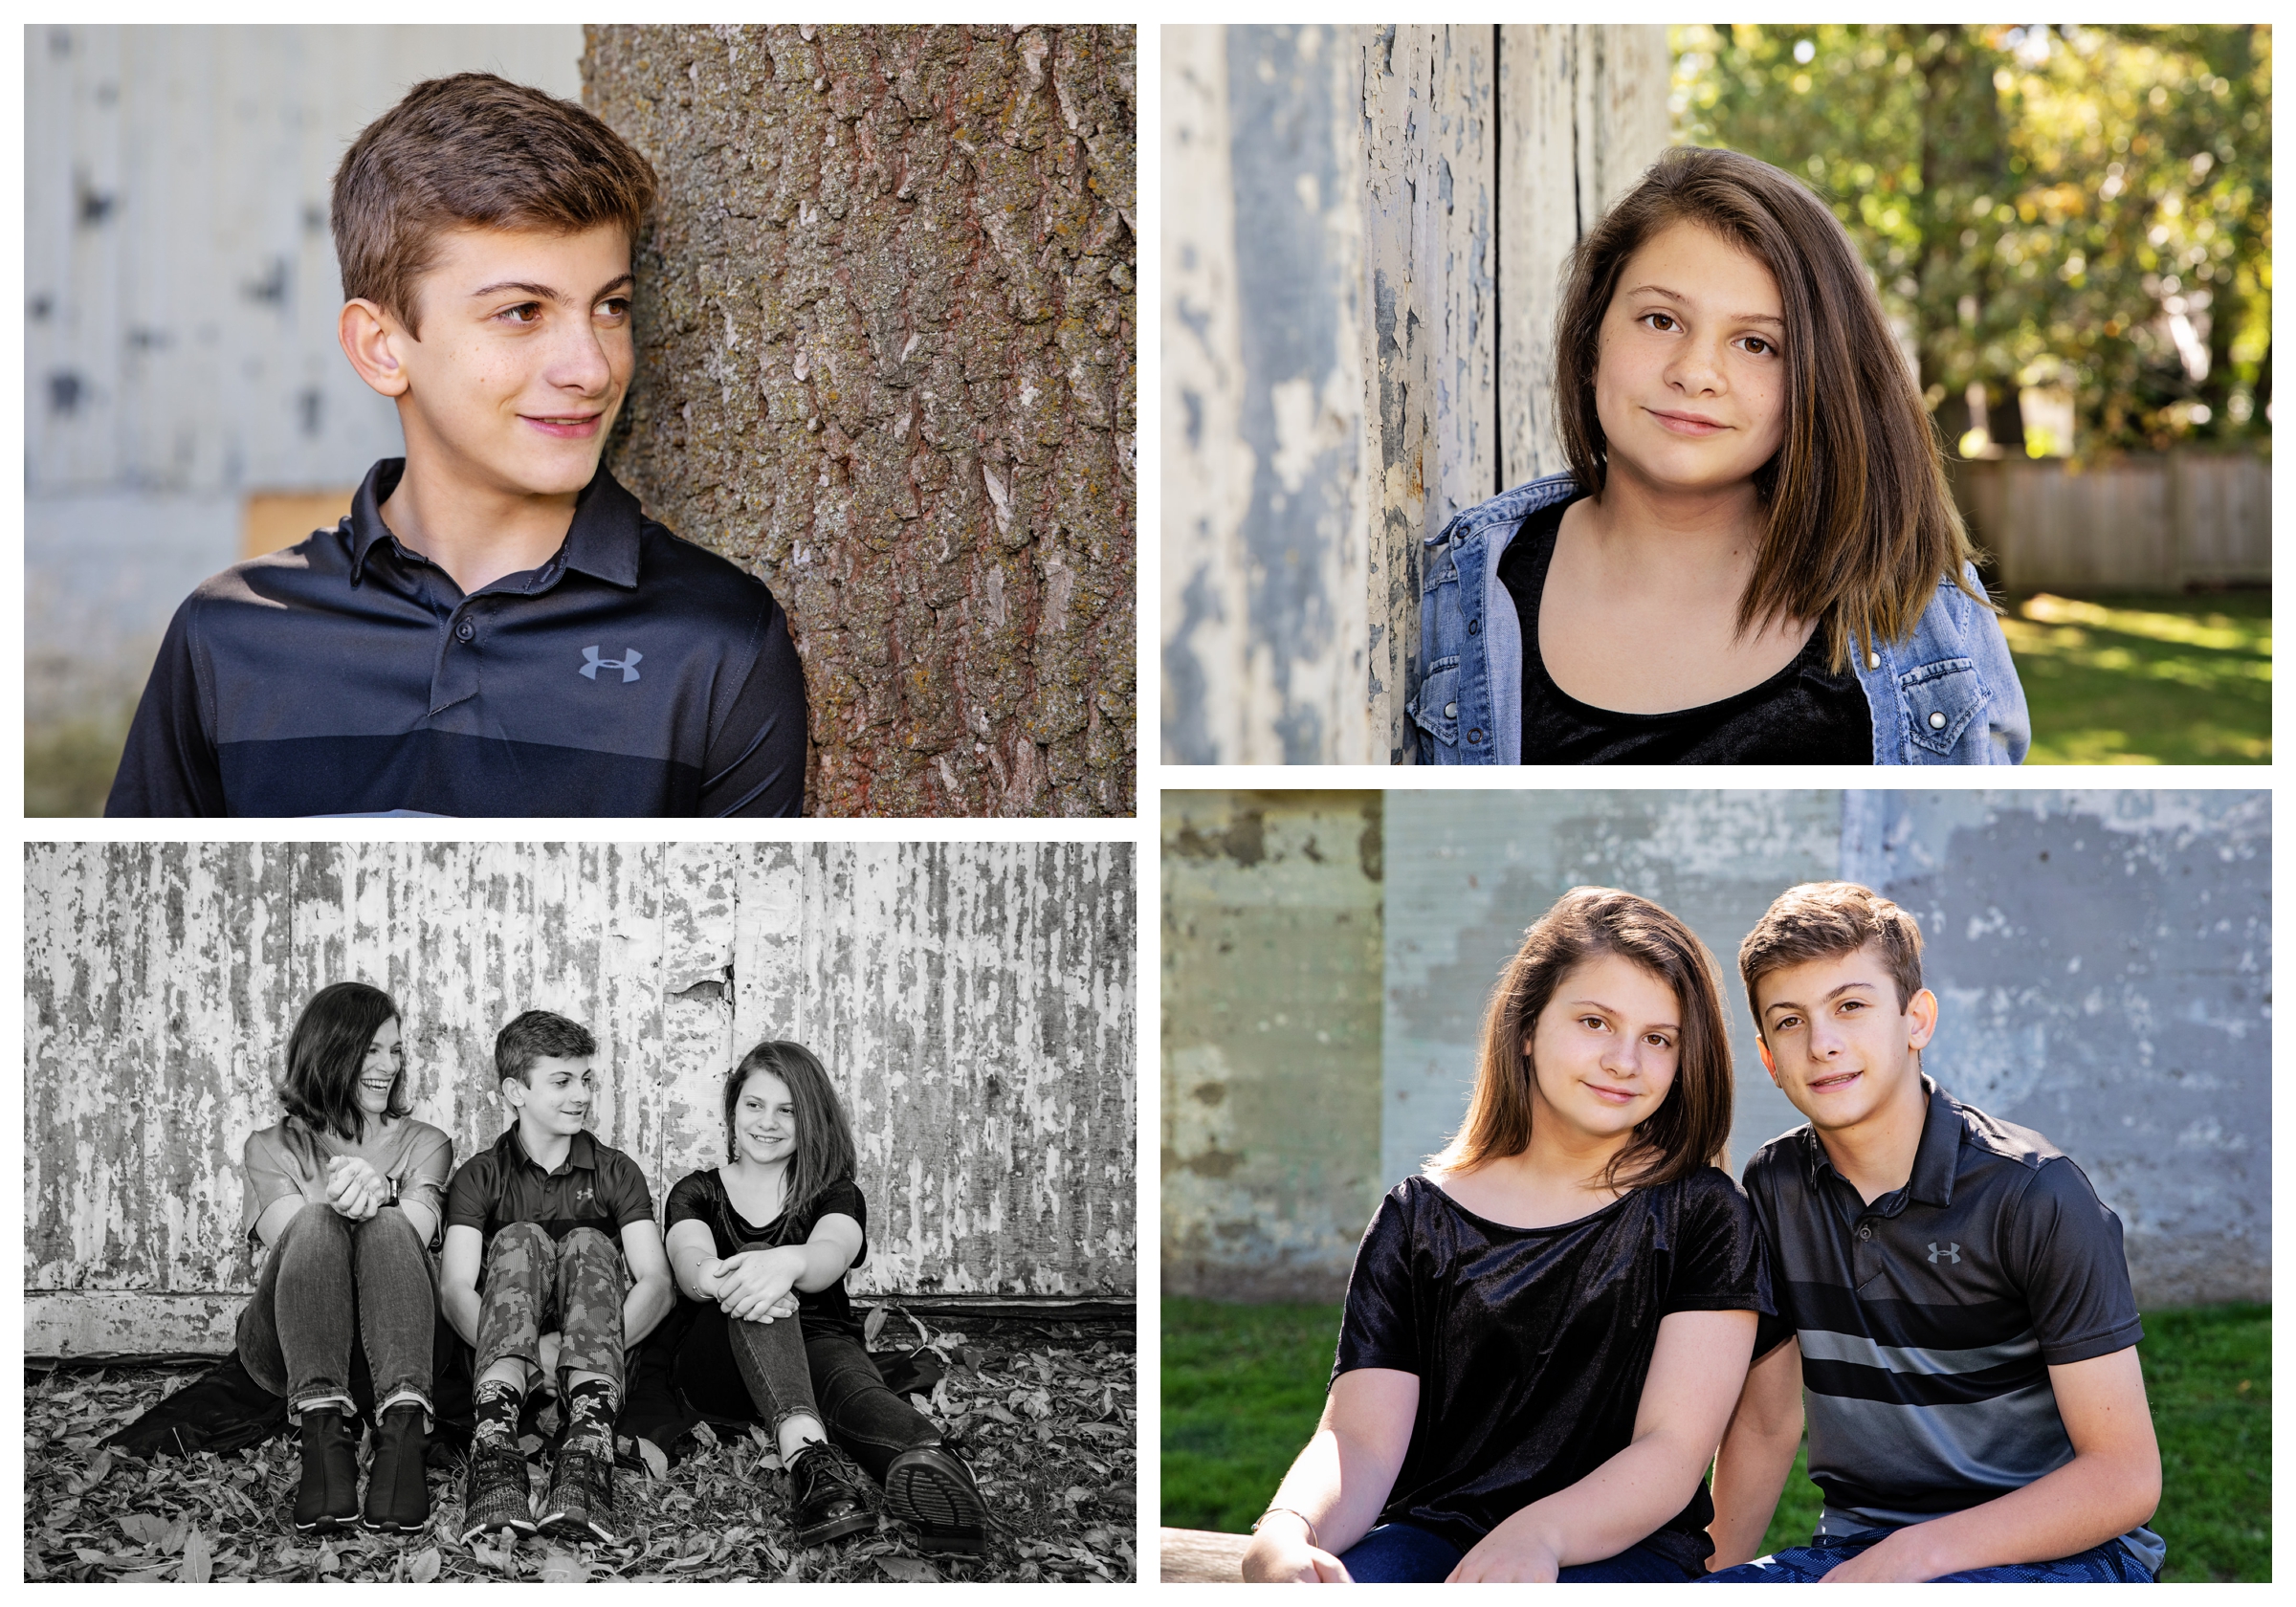 Collage of photos from fall family photo session in oakville park
